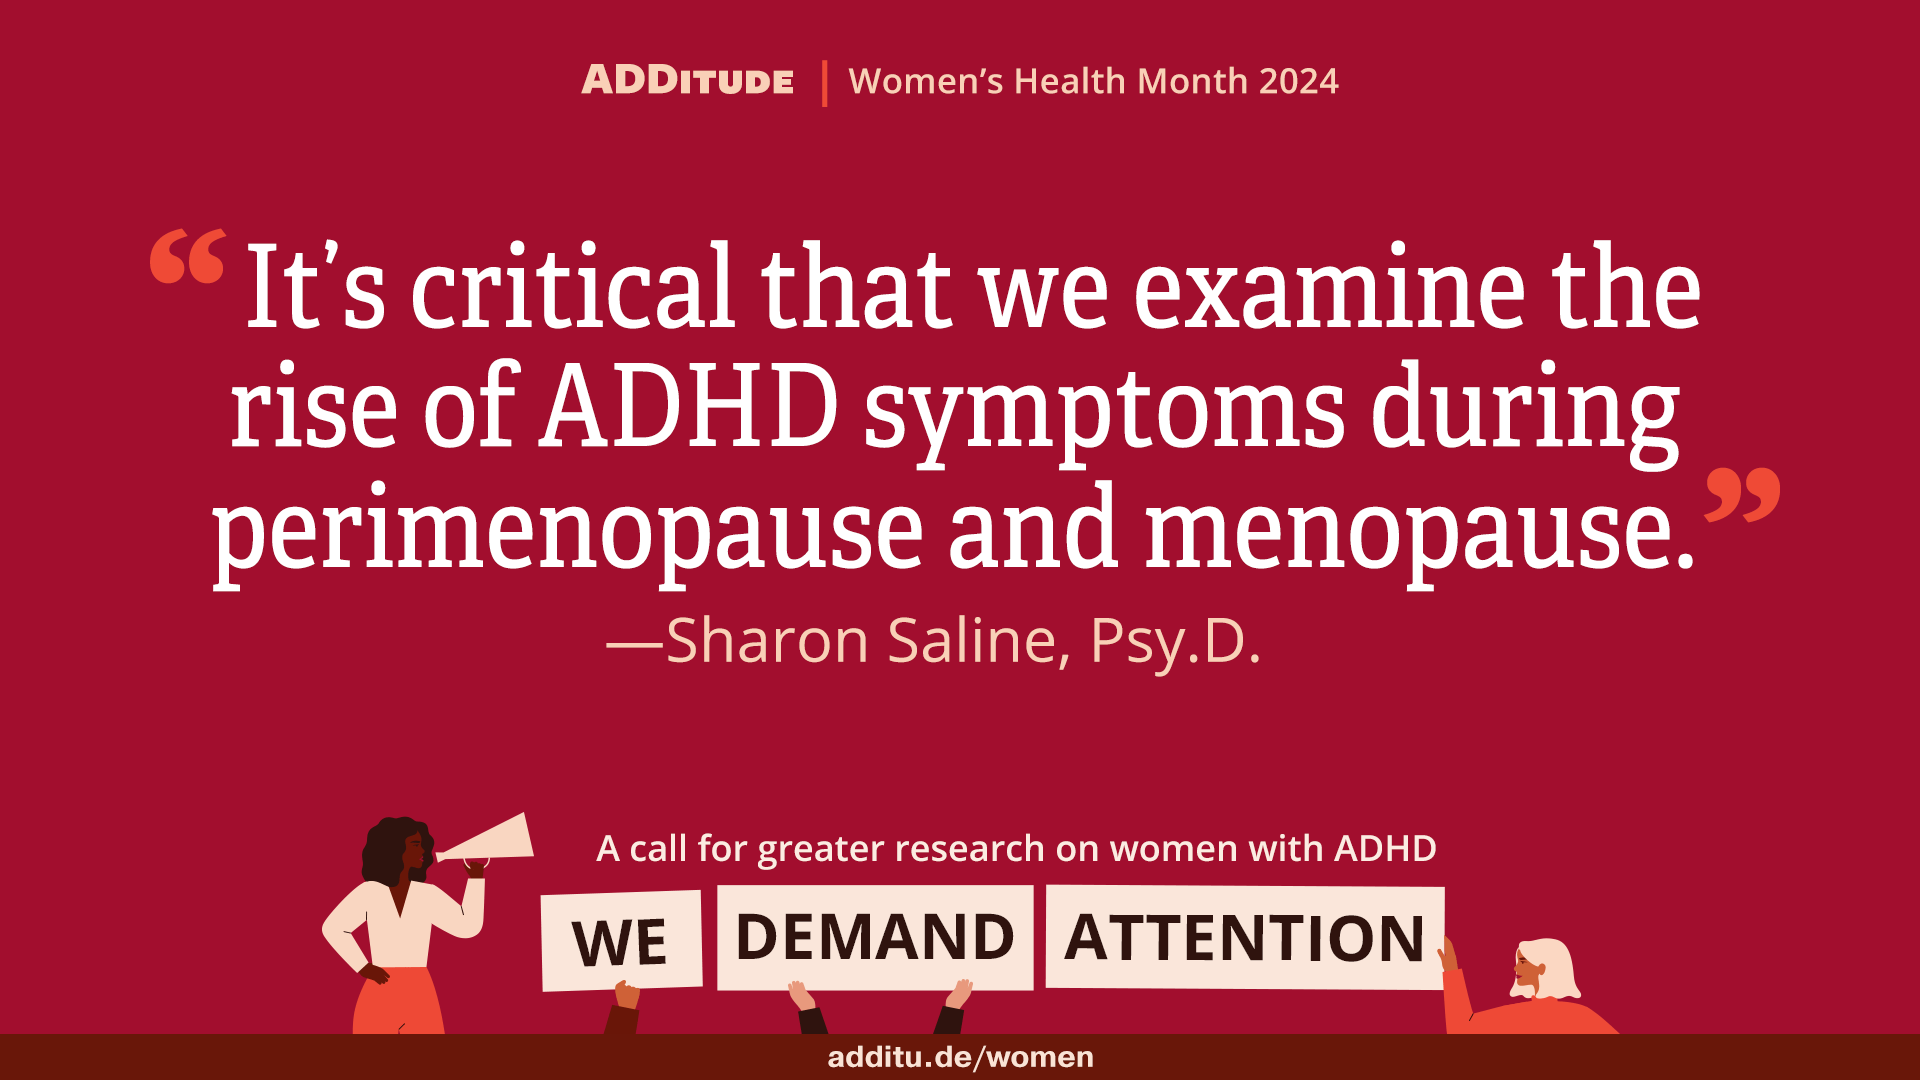 An image of a quote from Dr. Sharon Saline, Psy.D. that reads: "It's critical that we examine the rise of ADHD symptoms during perimenopause and menopause"